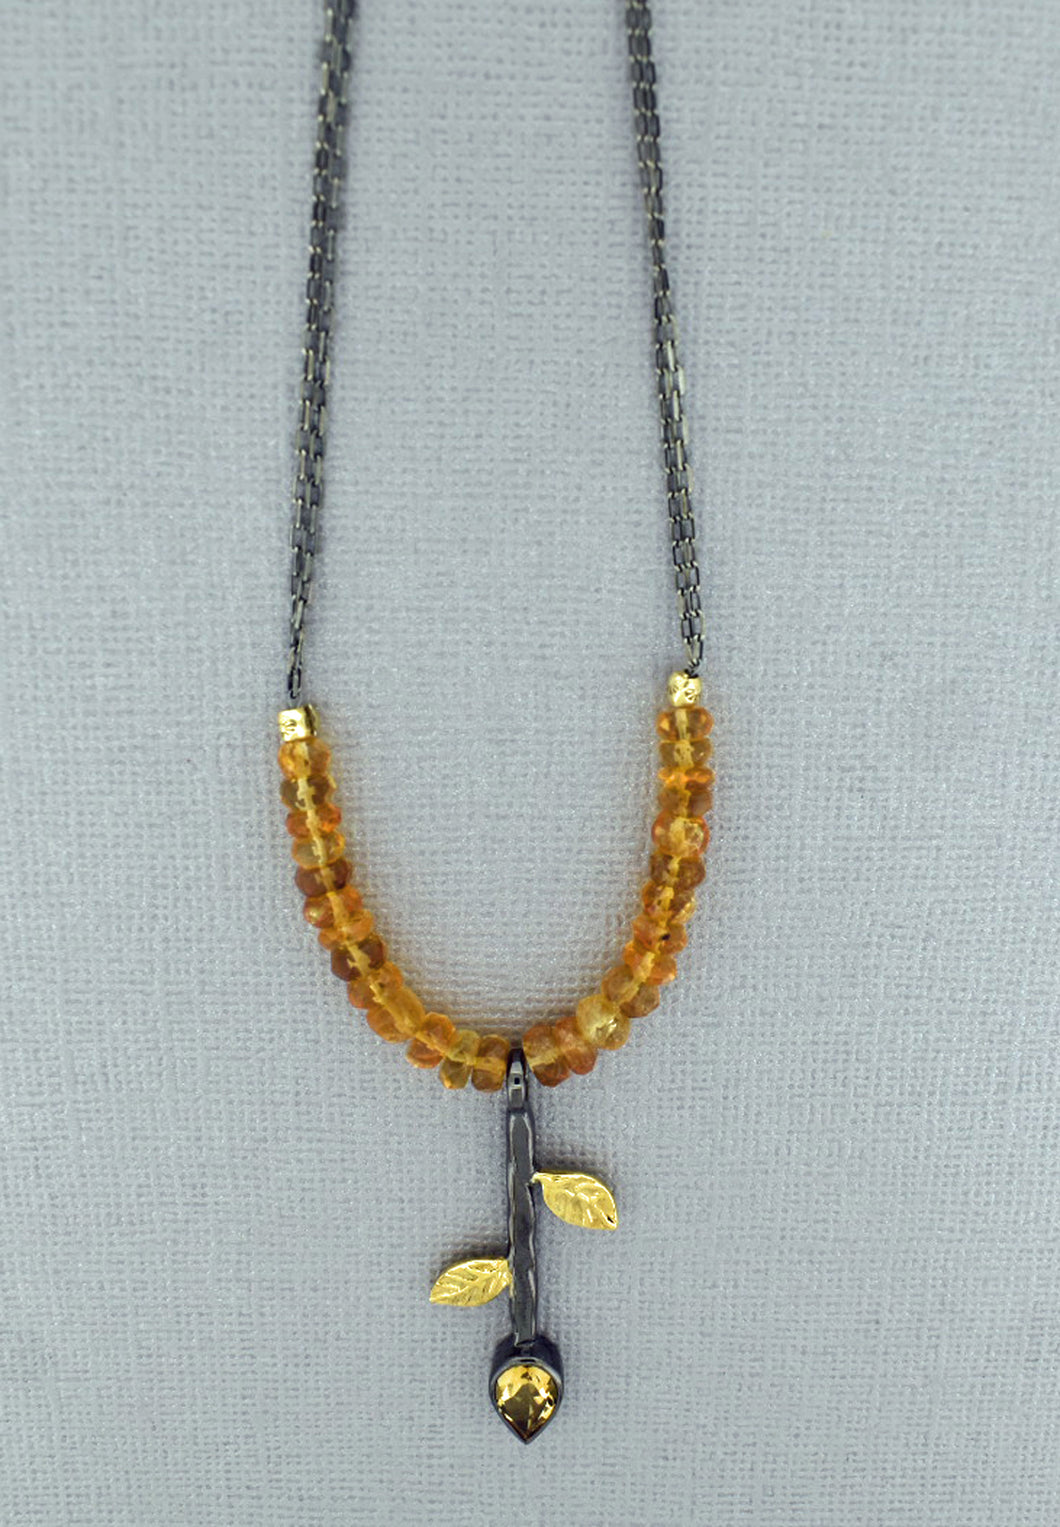 Oxidized Chain Necklace with Leaf Pendant